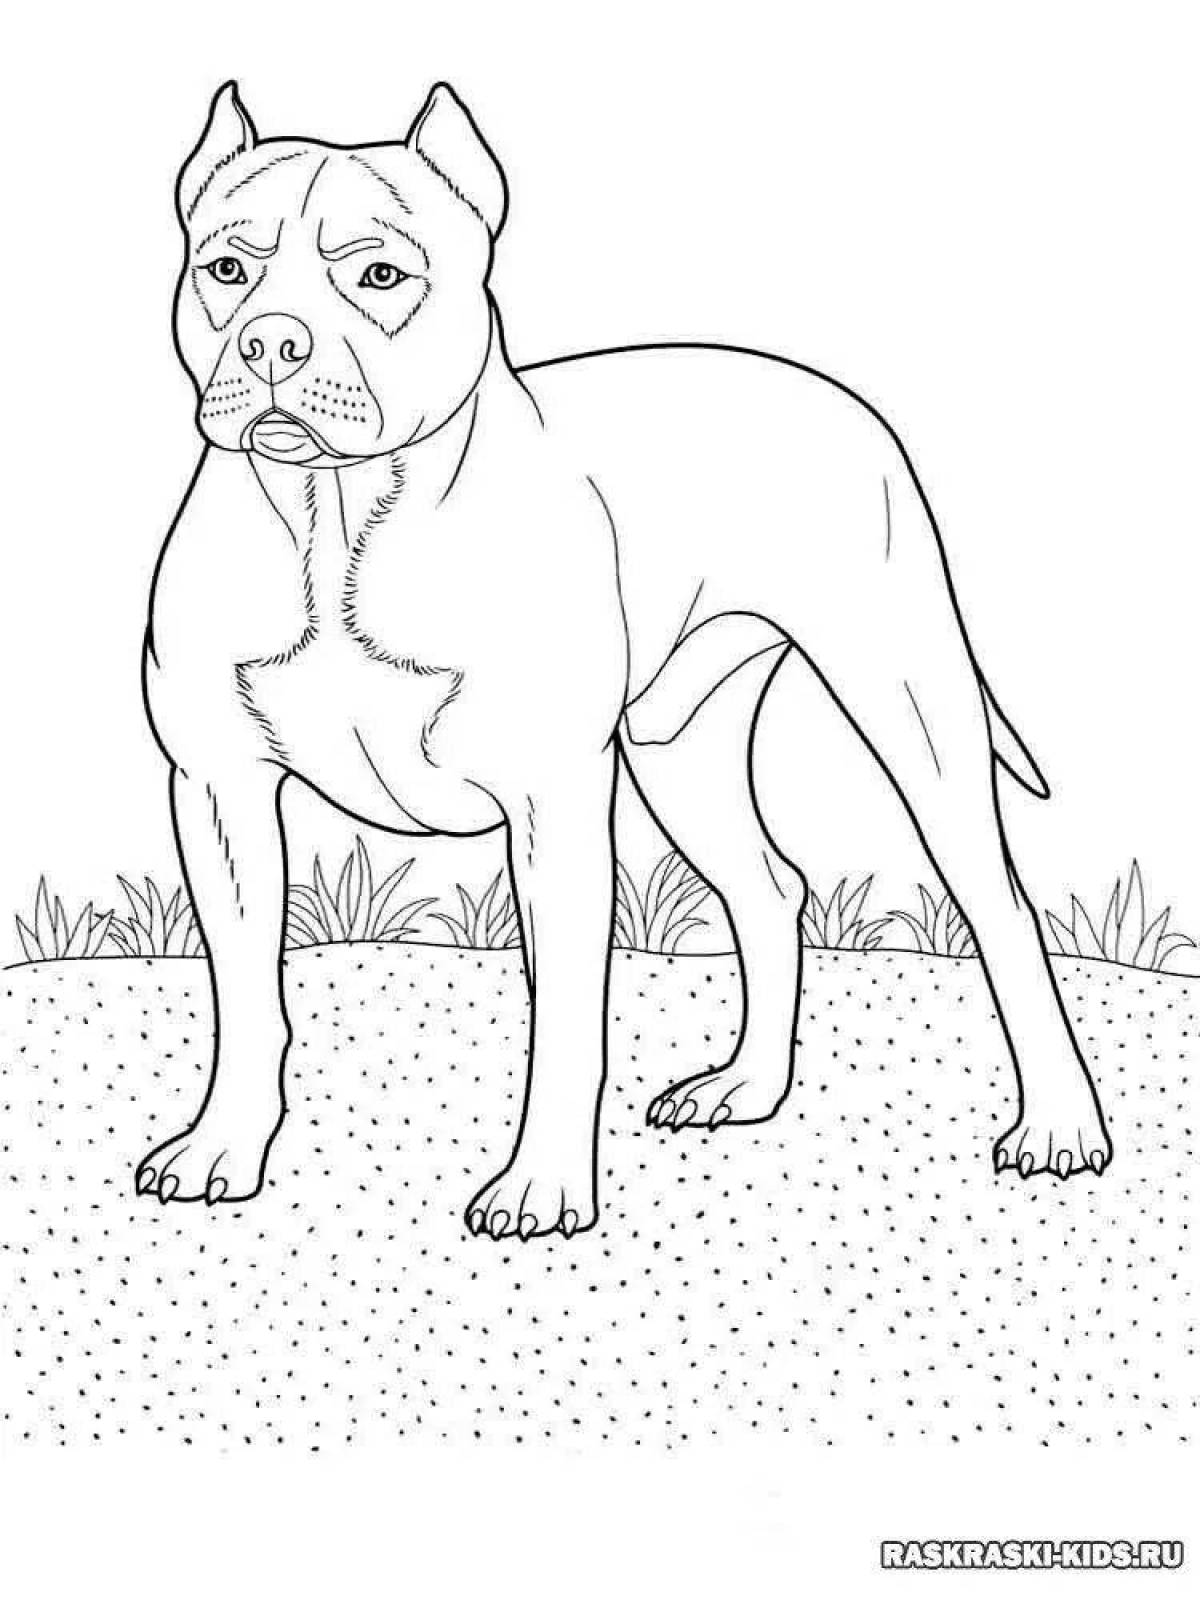 Energetic coloring of dog breeds